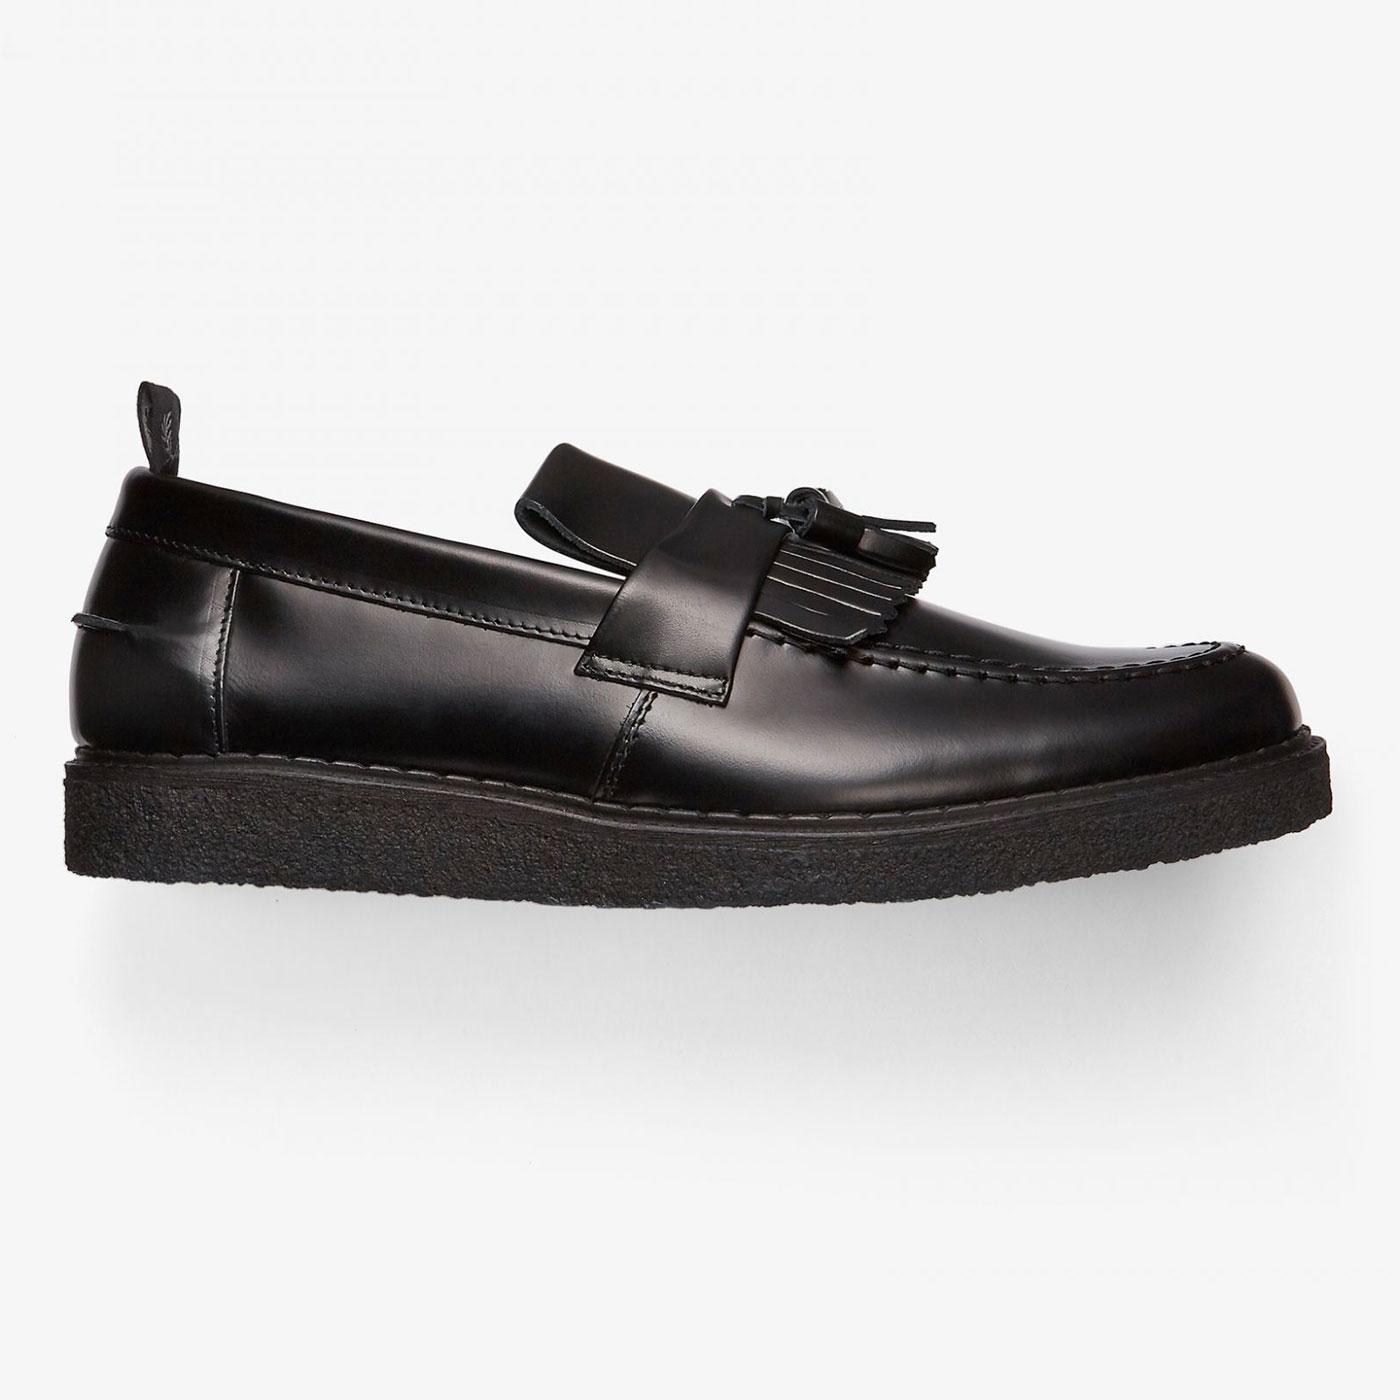 FRED PERRY x GEORGE COX Men's Mod Tassel Loafers B